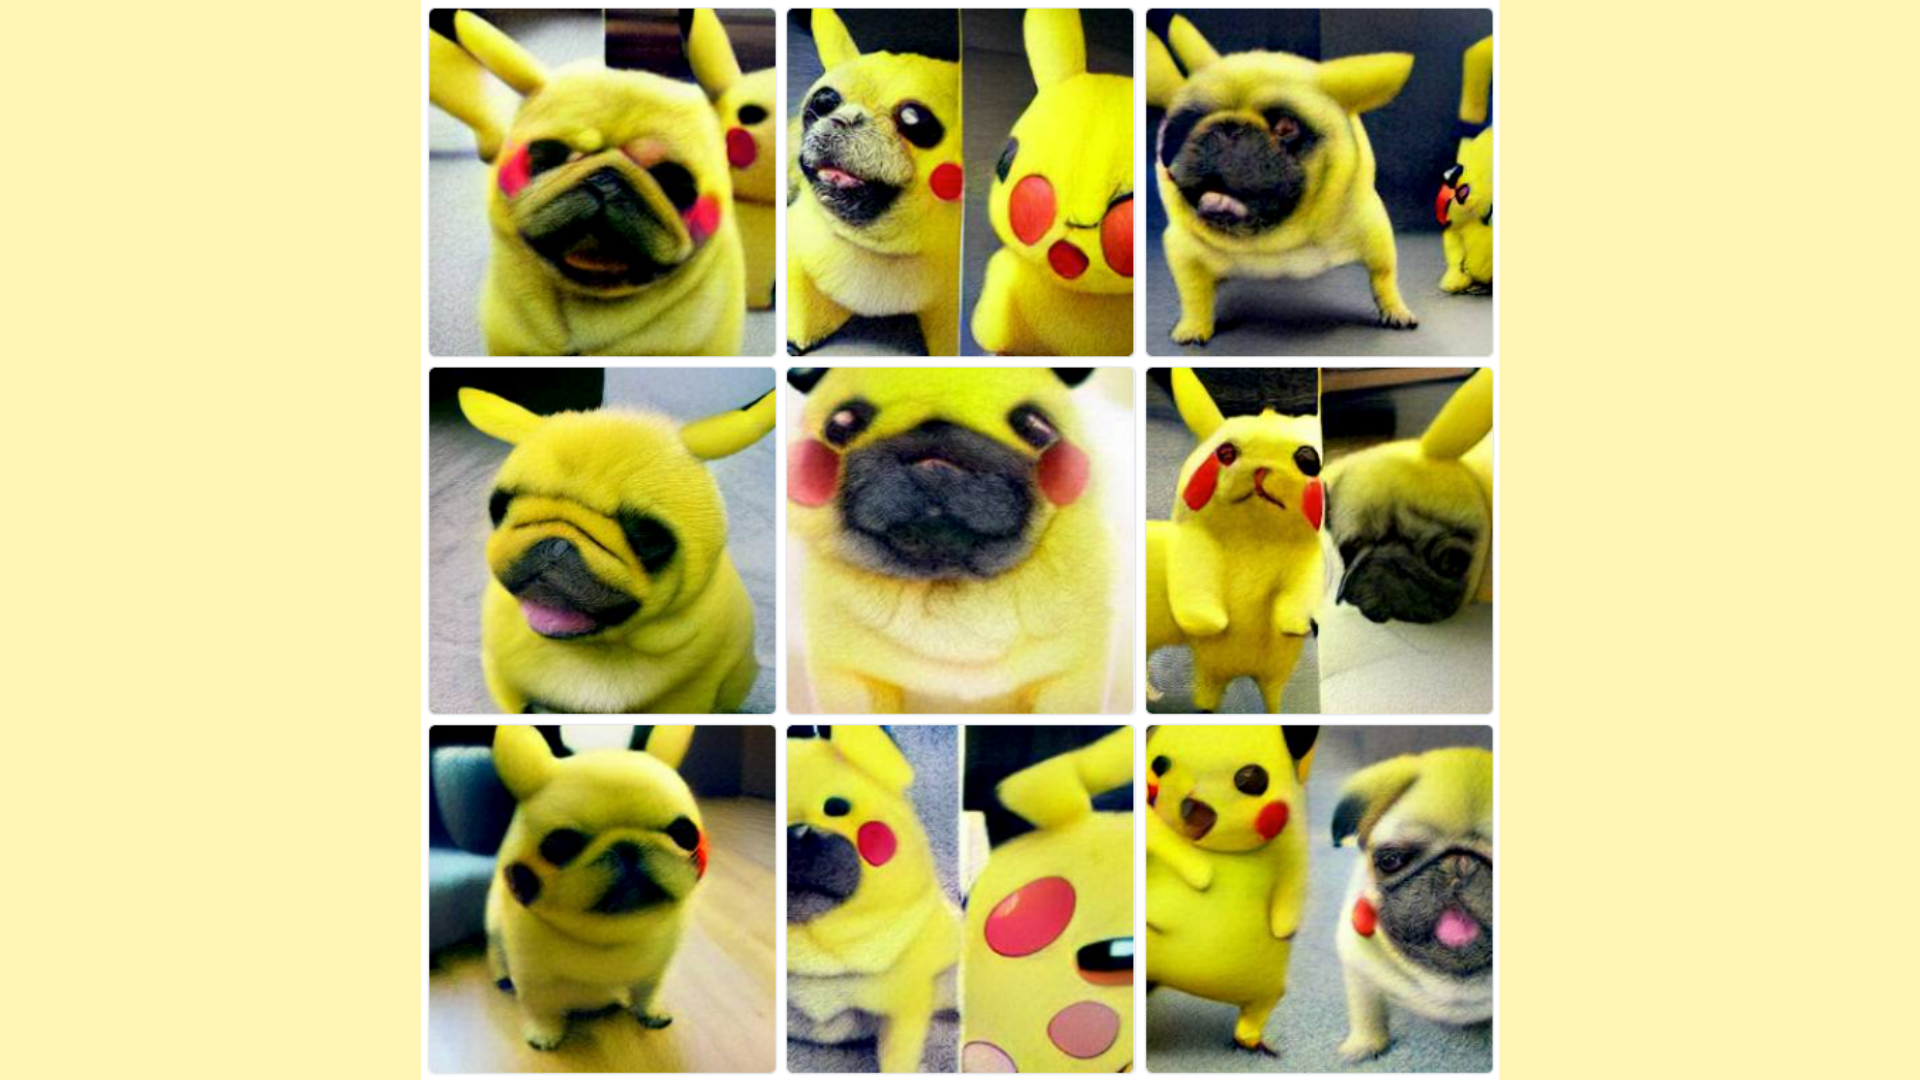 an image of various distorted pugs made to look like the pokemon pikachu.